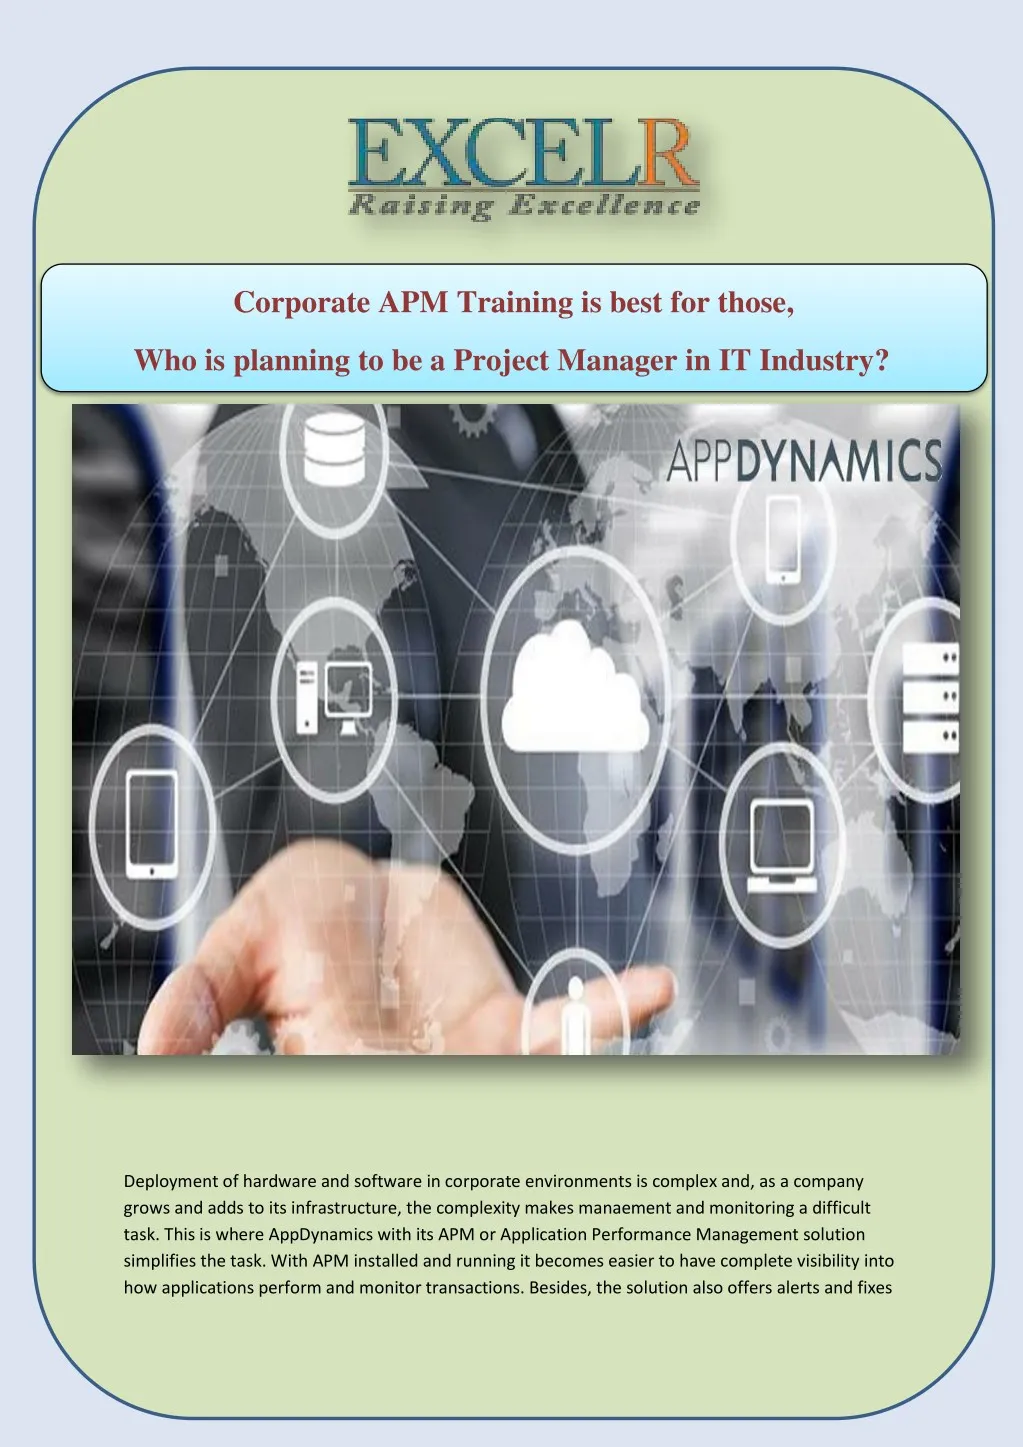 corporate apm training is best for those